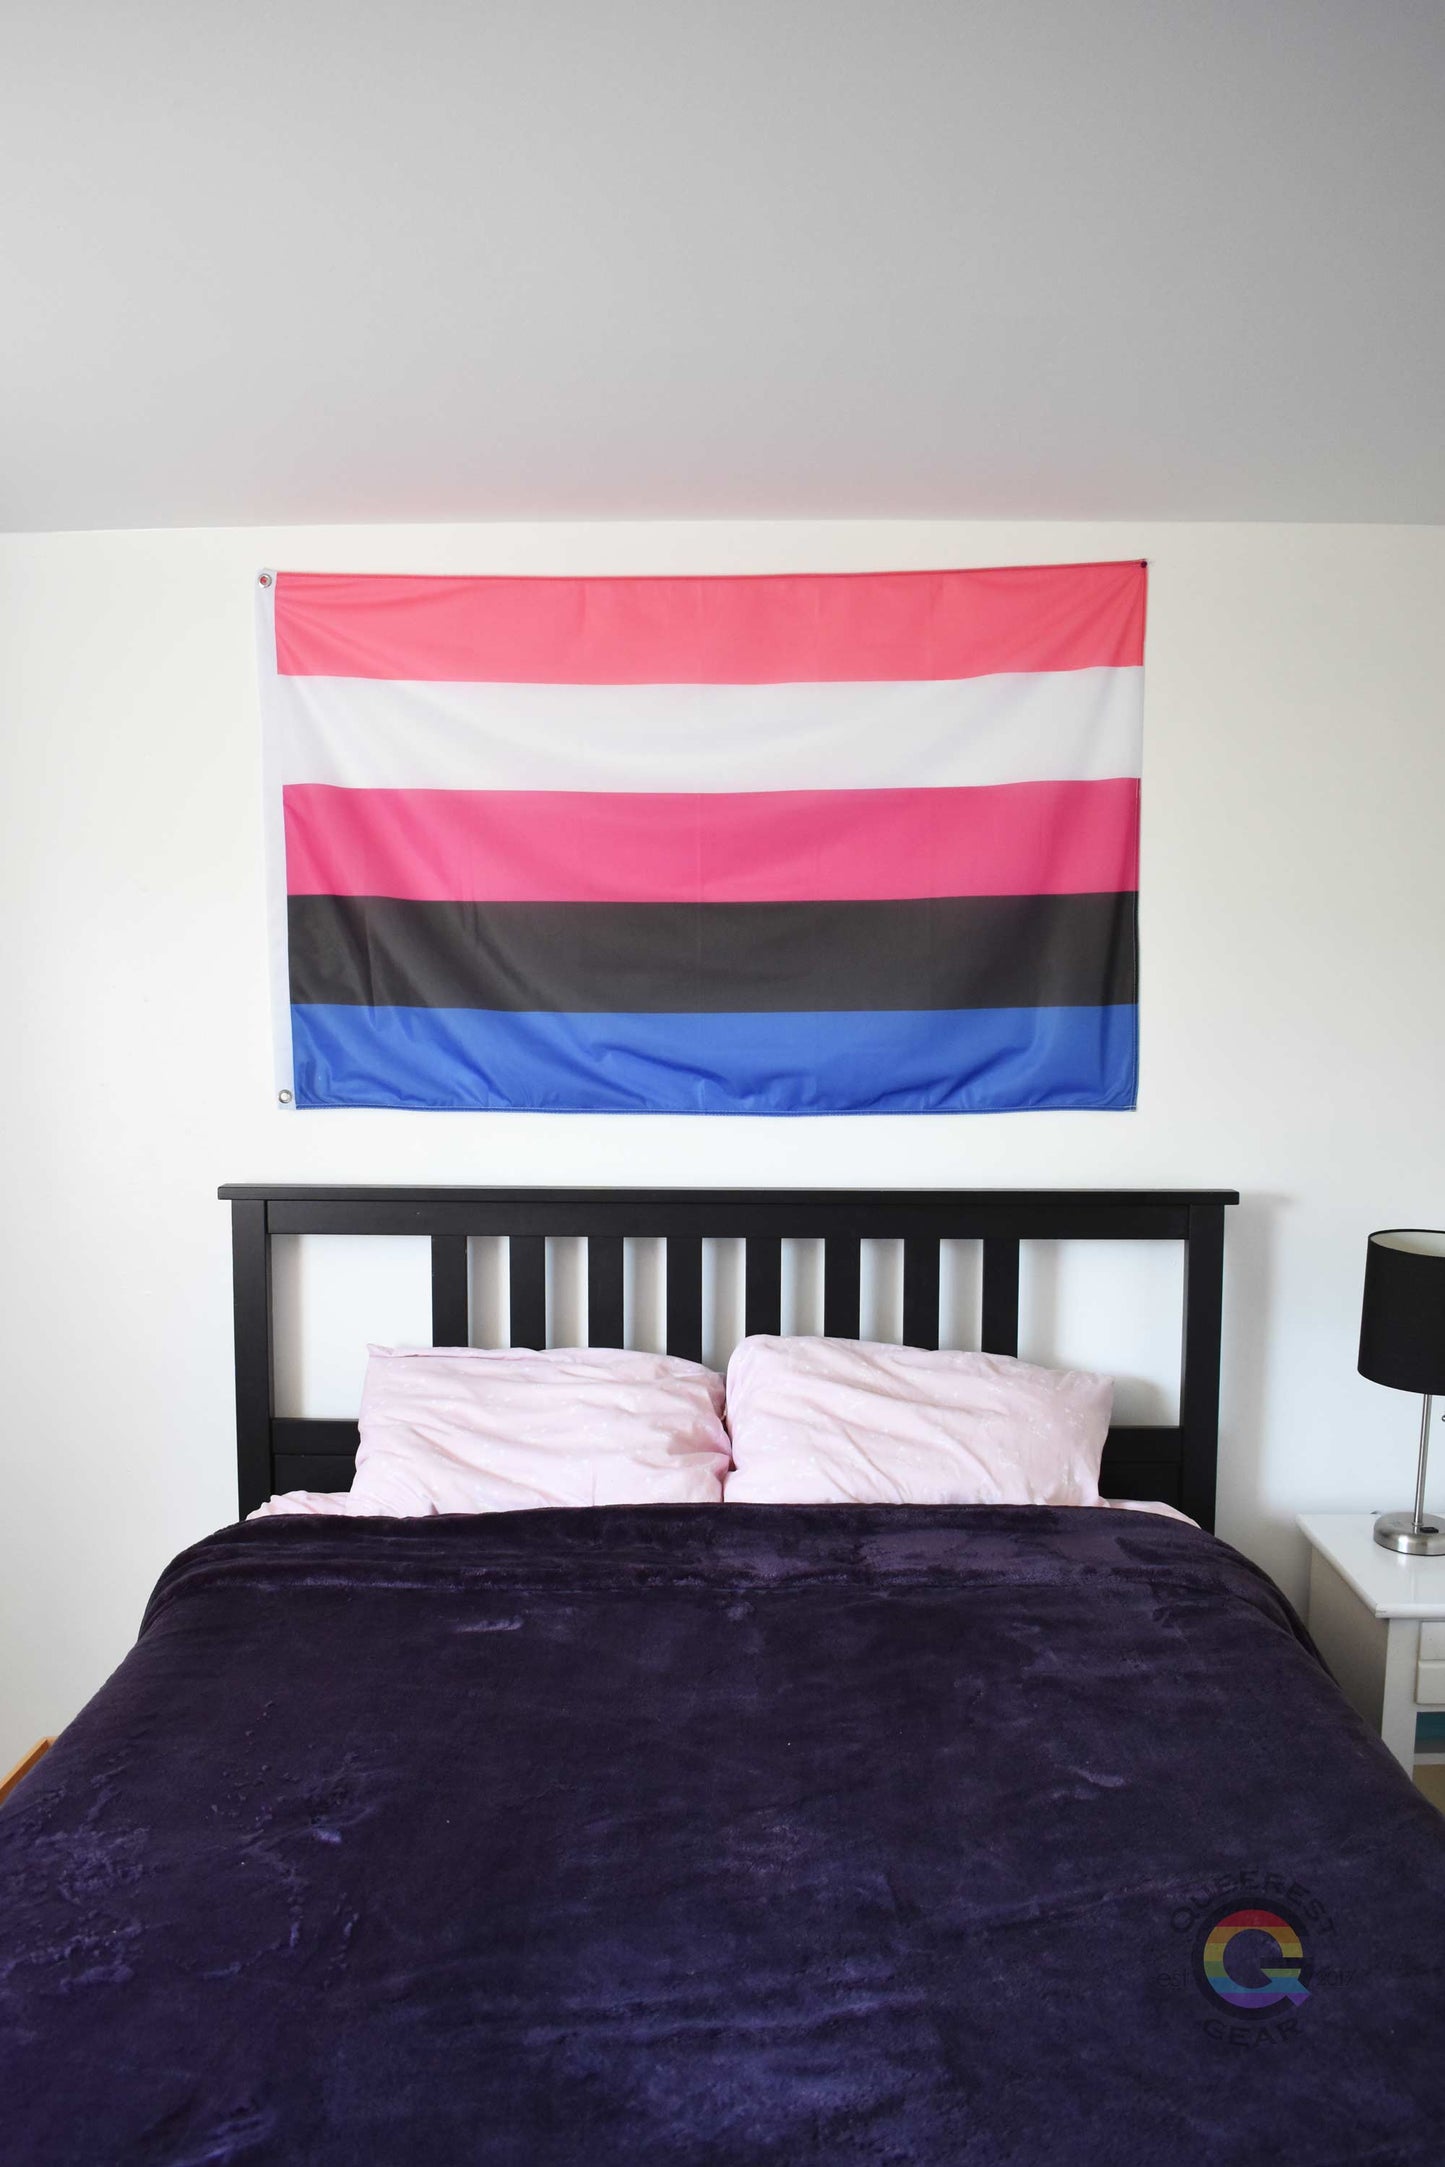  3’x5’ genderfluid pride flag hanging horizontally on the wall of a bedroom centered above a bed with a purple blanket